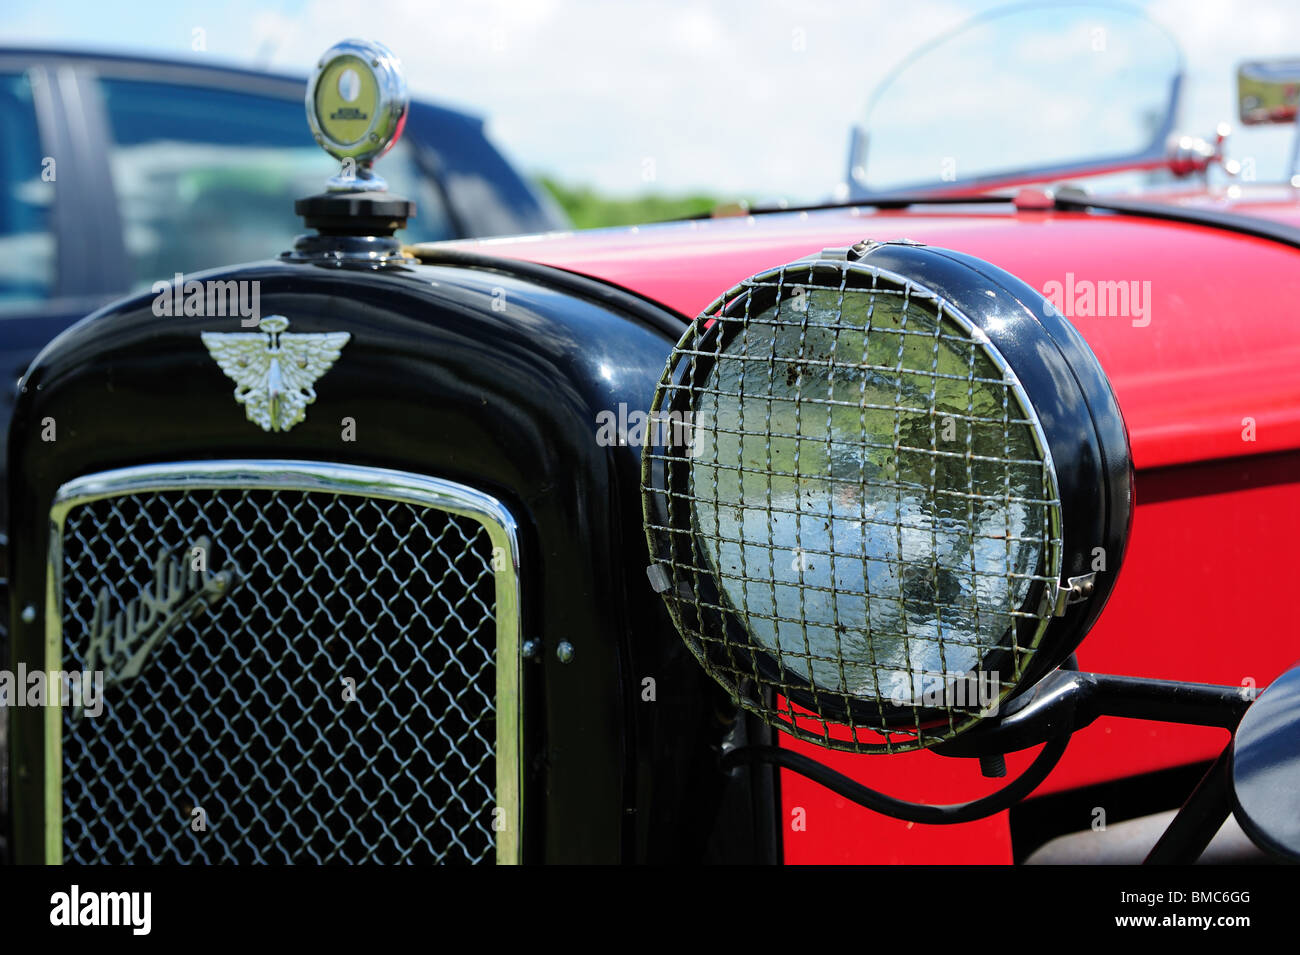 Close-up view of radiator and headlight of an Austin 7 2-Seater Sports car Stock Photo